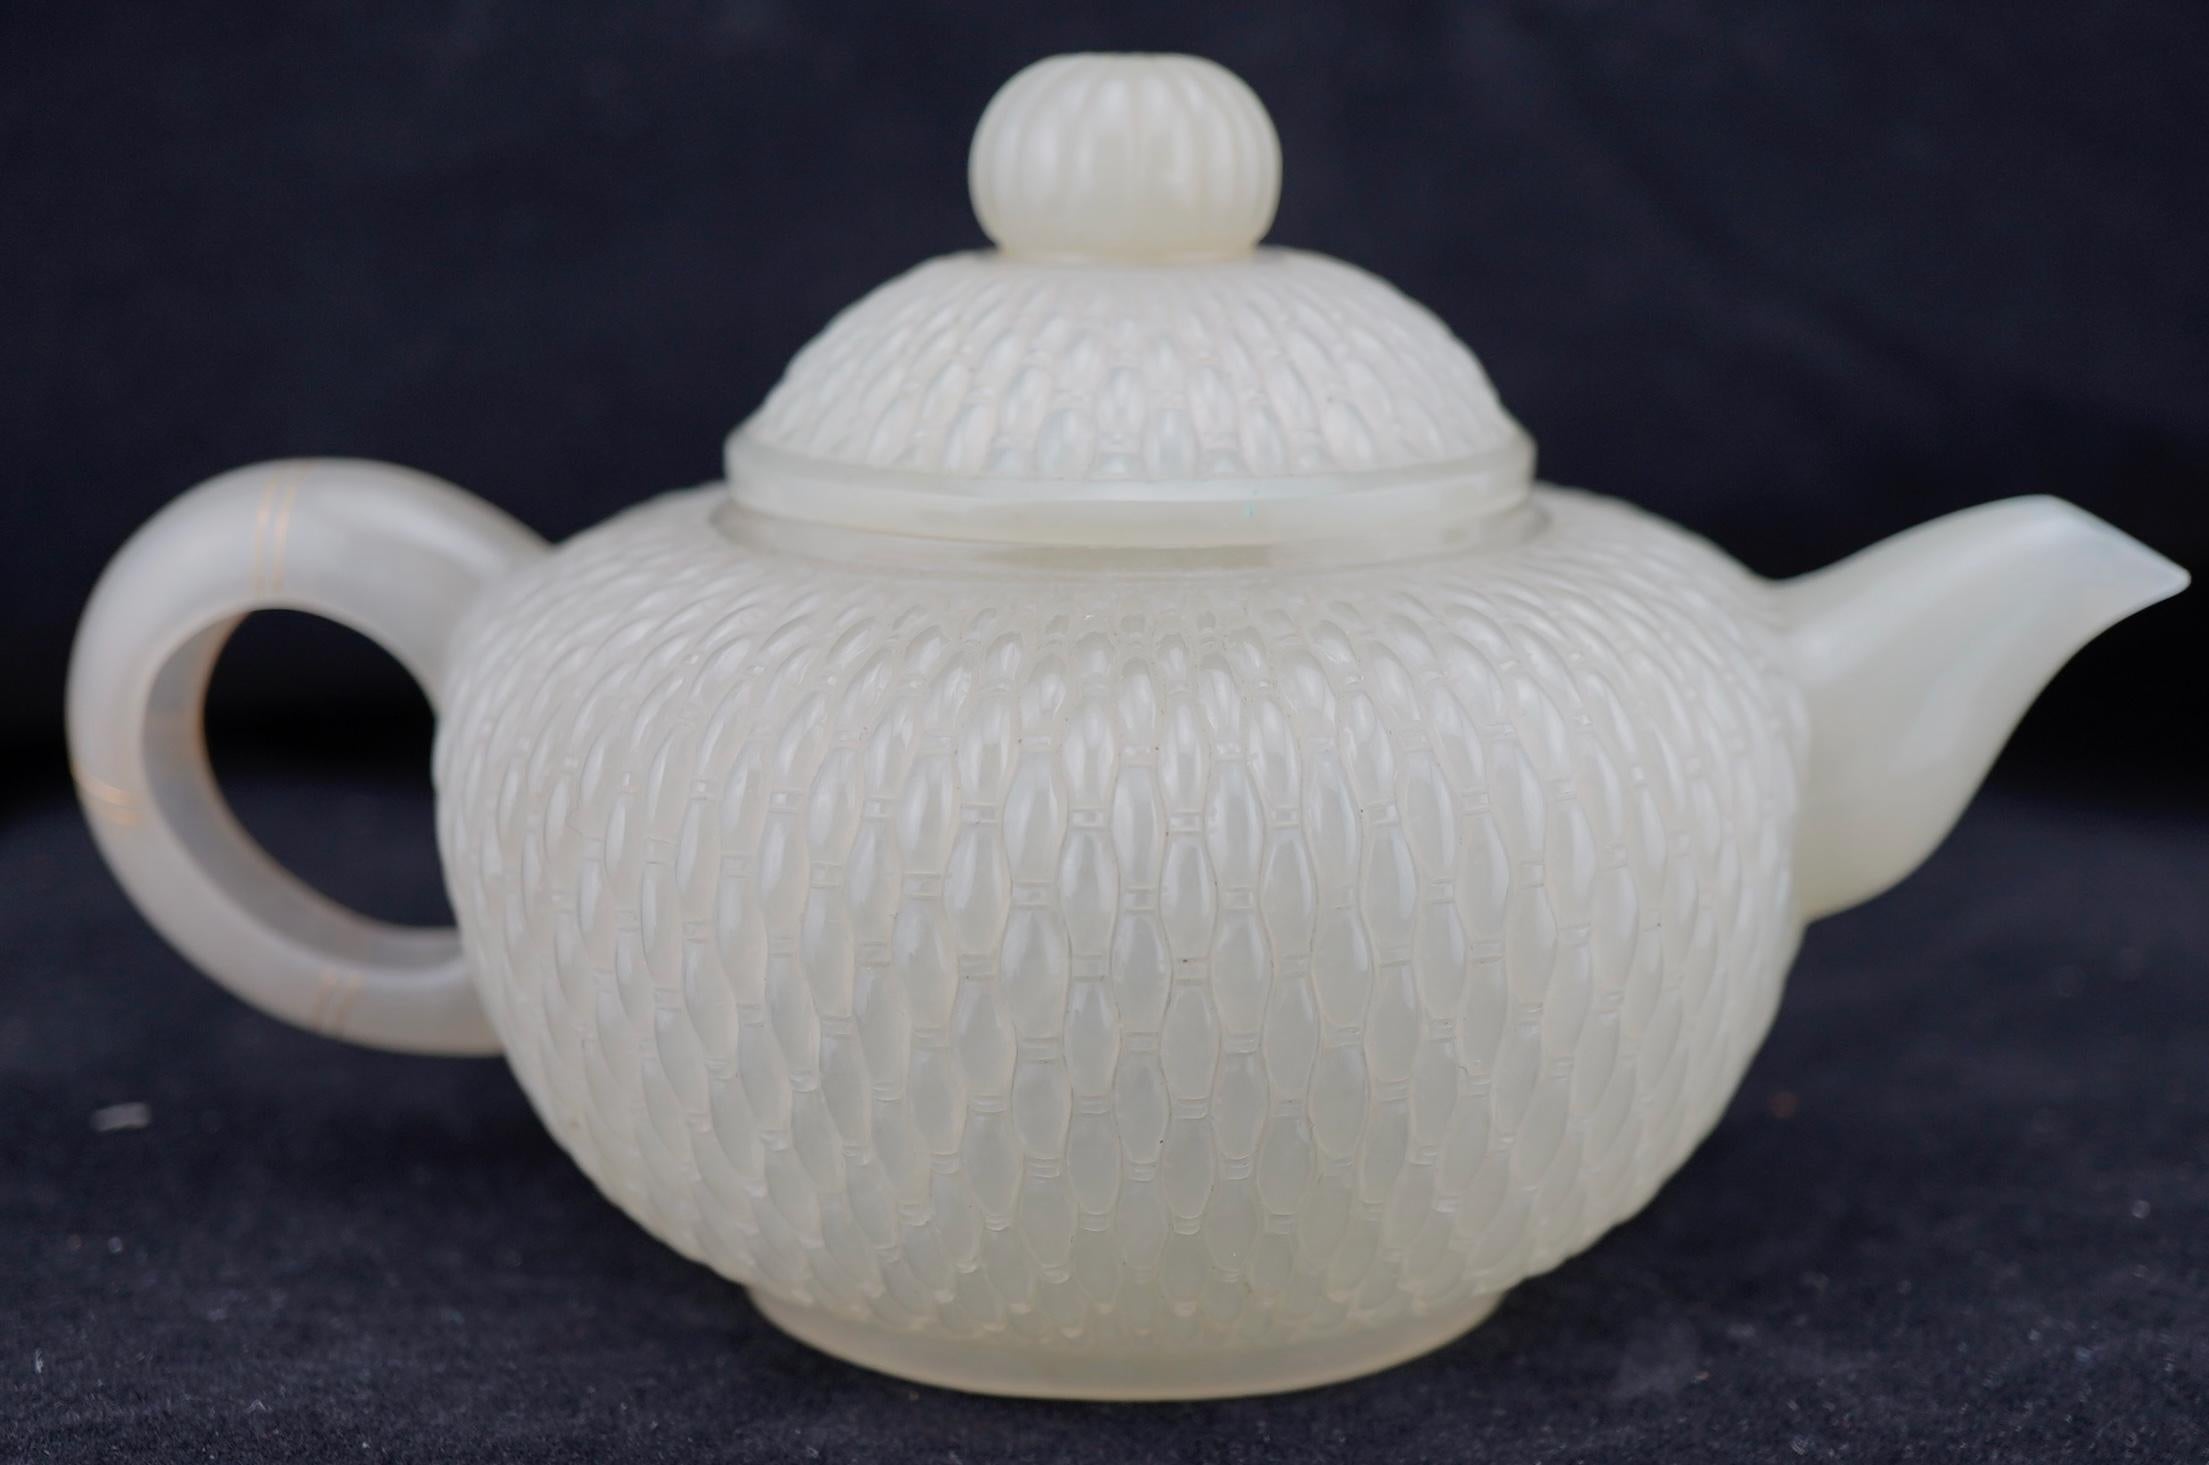 Chinese nephrite jade teapot compressed globular form, with S-shaped spout and C-shaped handle. The body decorated with hand carved fine basketweave pattern. The domed cover with a bud-form finial, the handle with three double rings inlaid in gold,